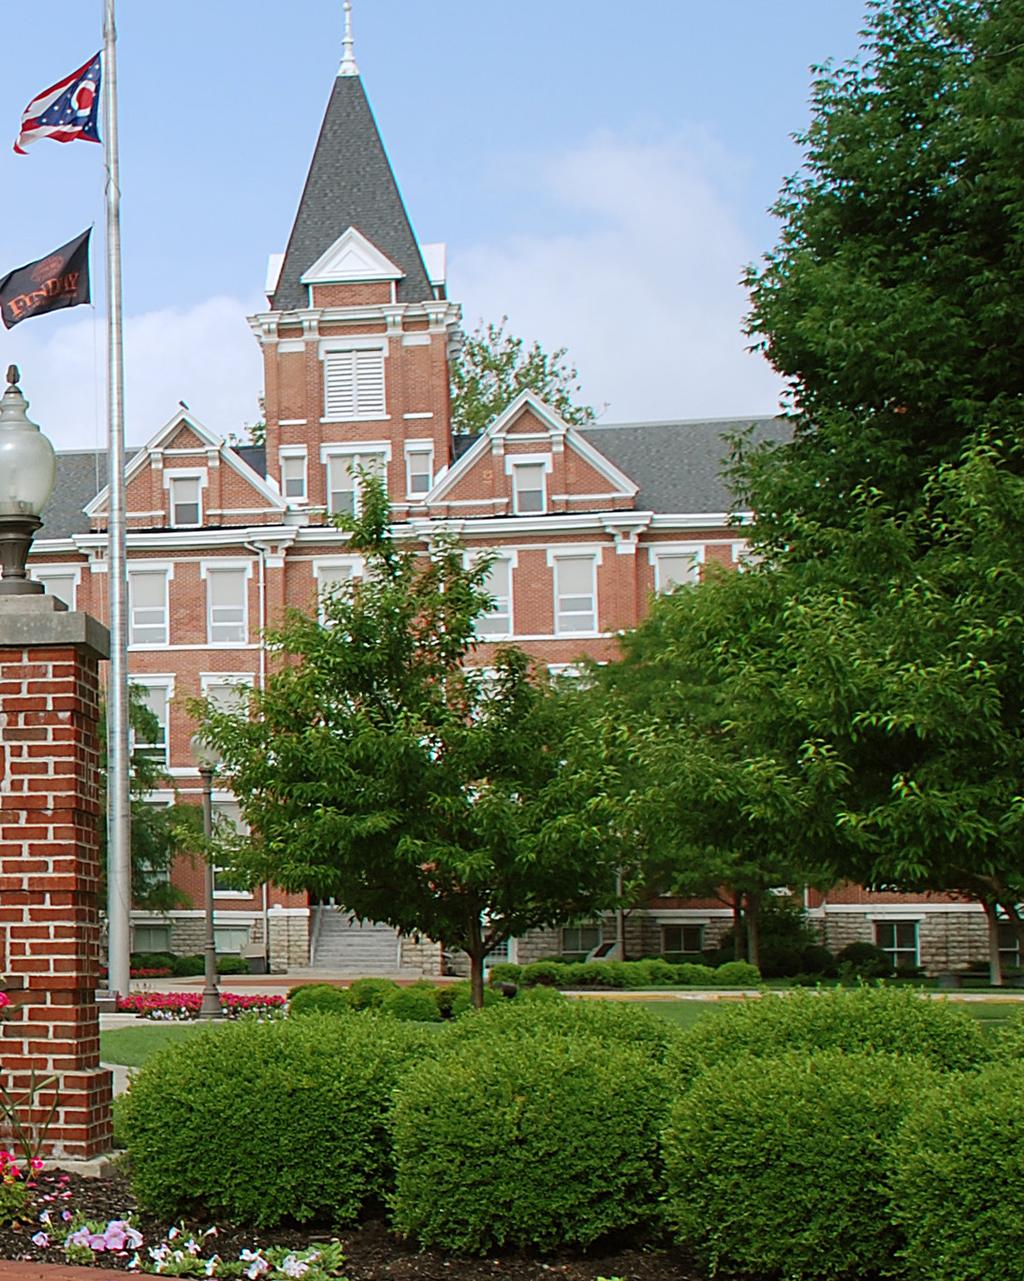 UF FAST FACTS Fully accredited university Established in 1882 Located in Findlay, Ohio, United States